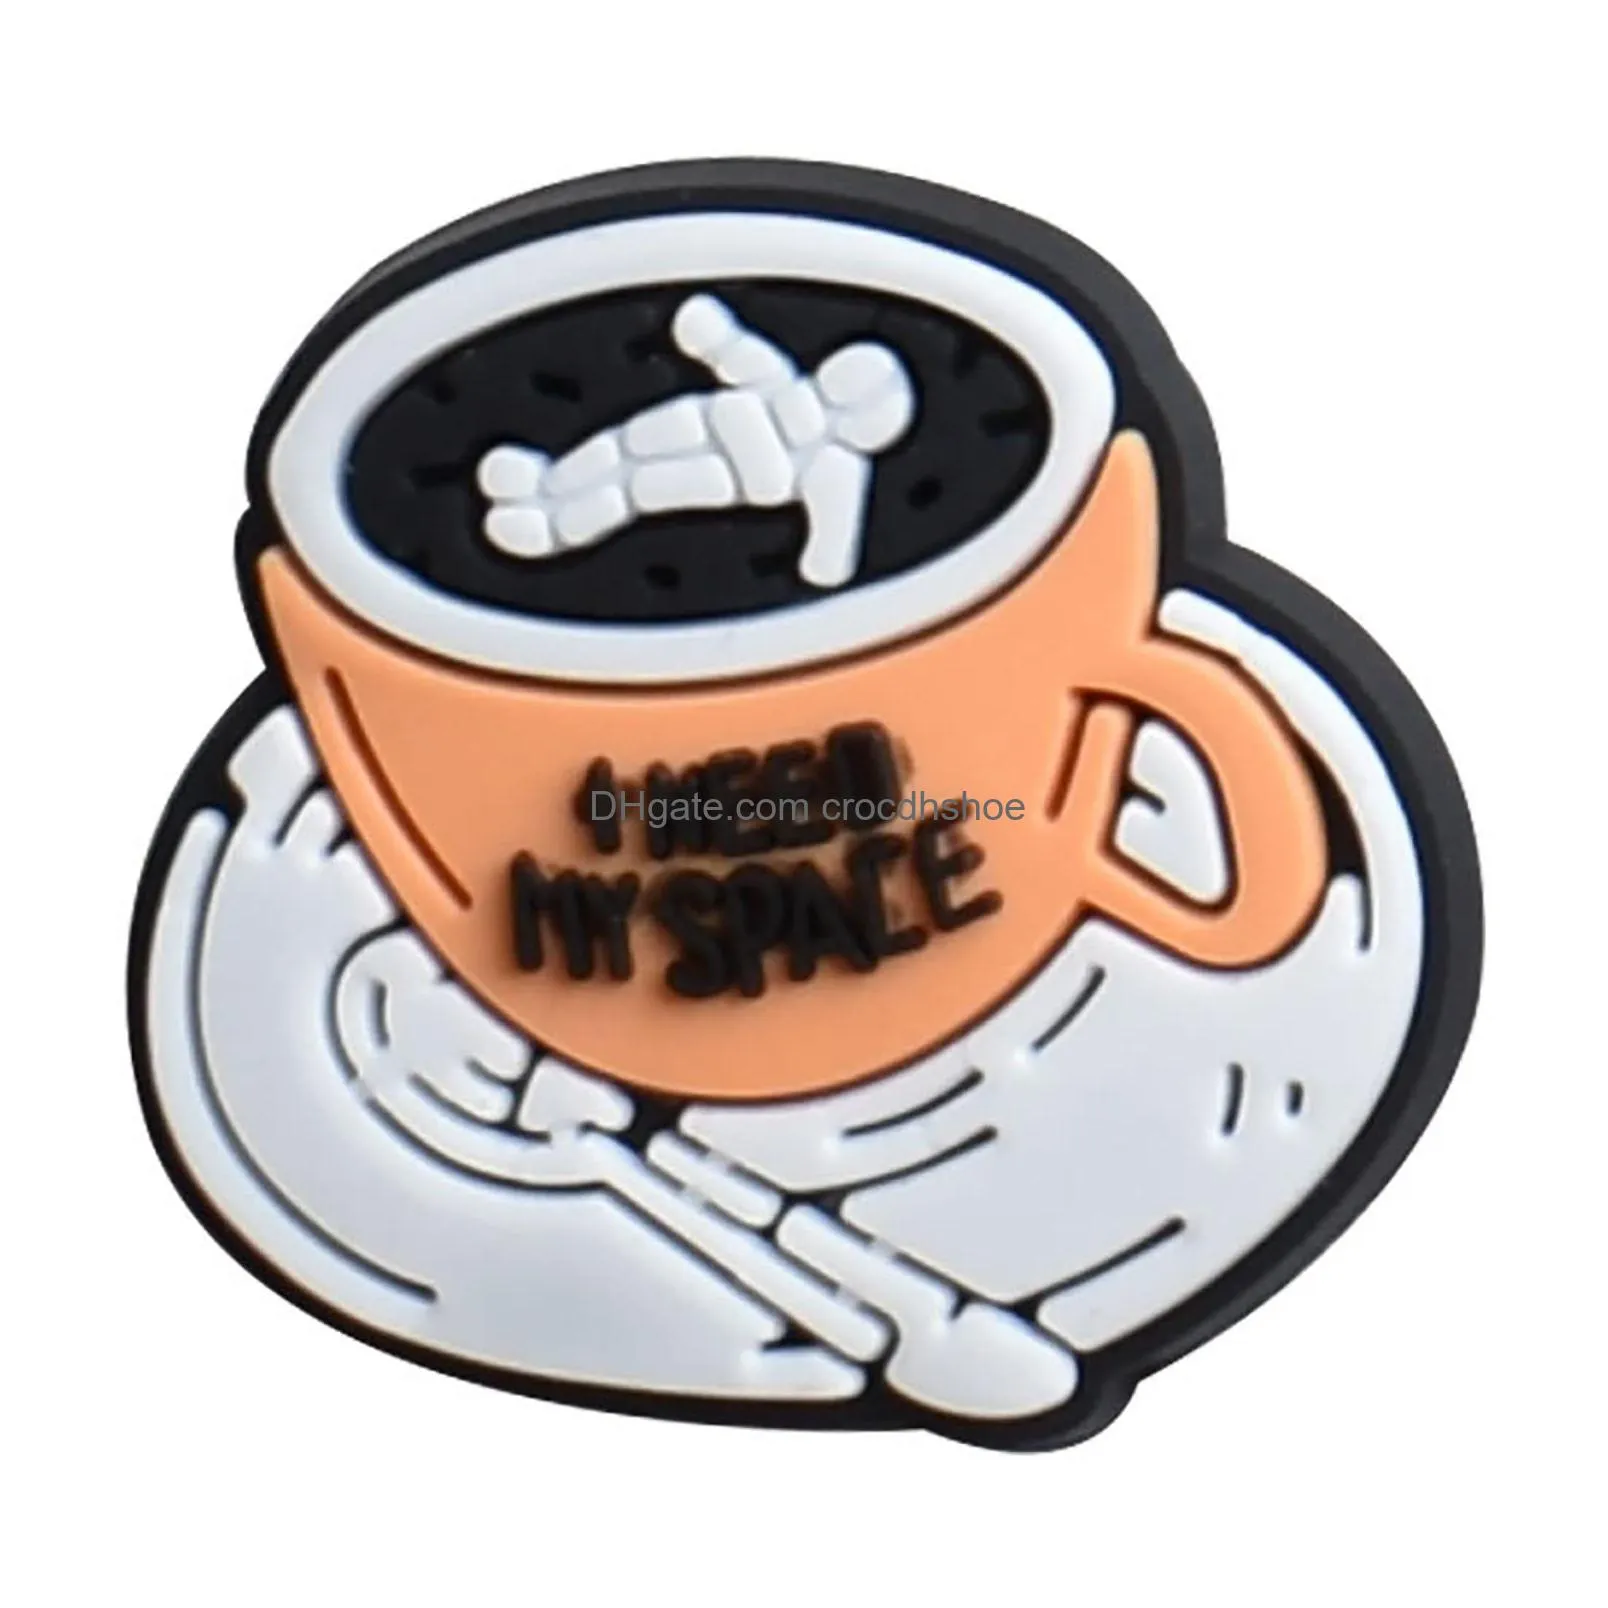 coffee cute boba croc charms for boys girls pvc food croc charms designer croc charms shoe decoration charms croc accessories party favor birthday gifts